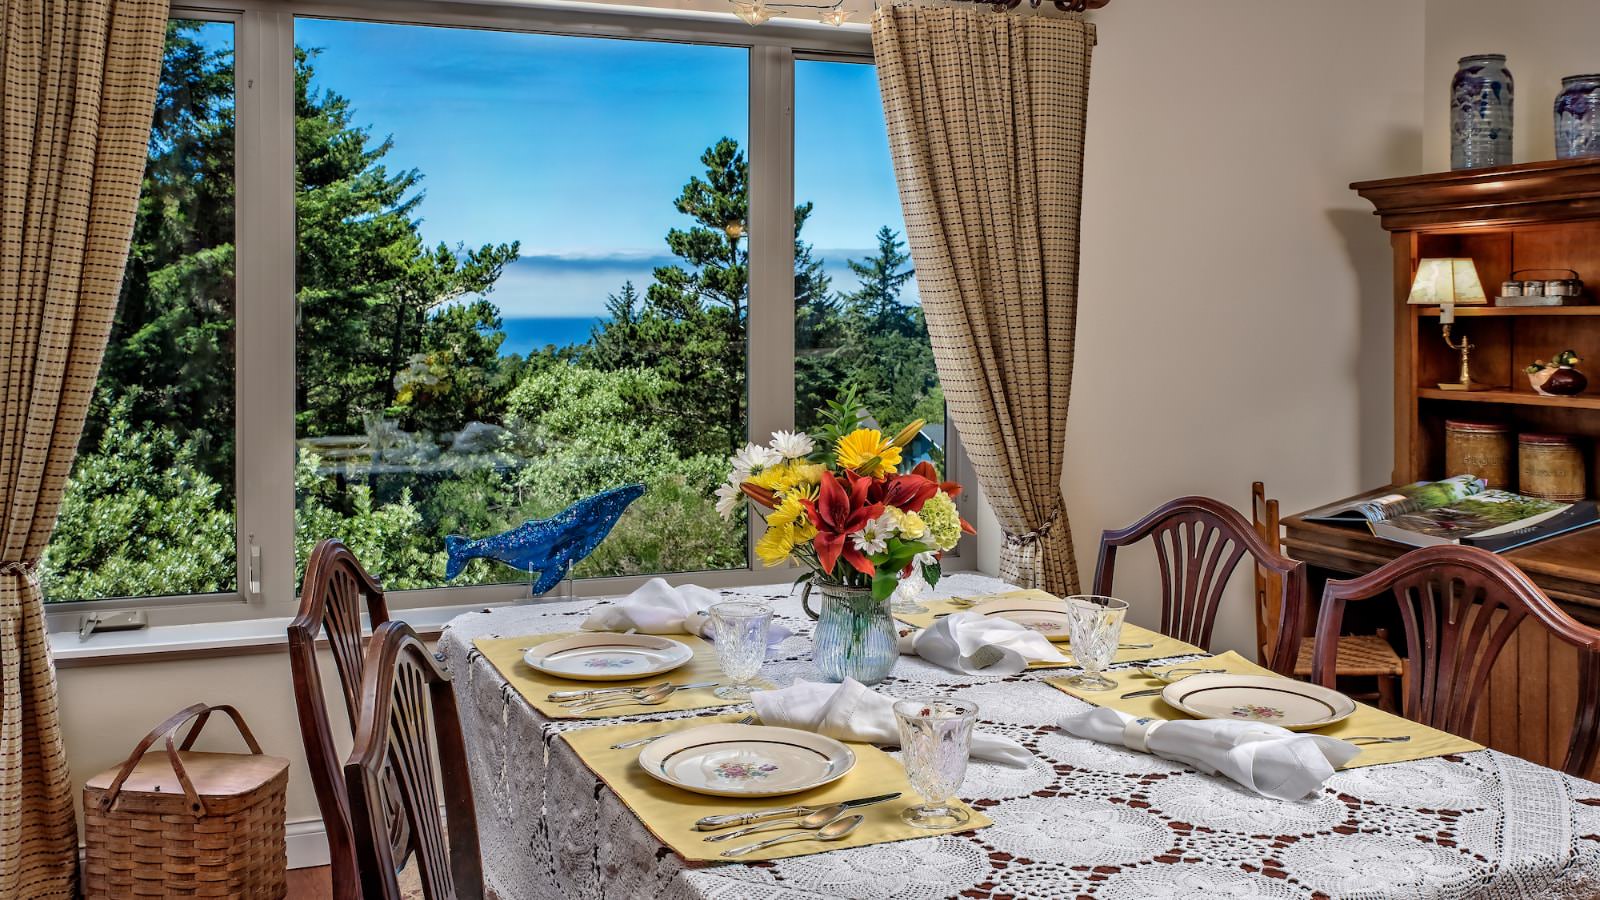 Dining room with wooden table and chairs, white tablecloth, place settings, and large window with views of the outside